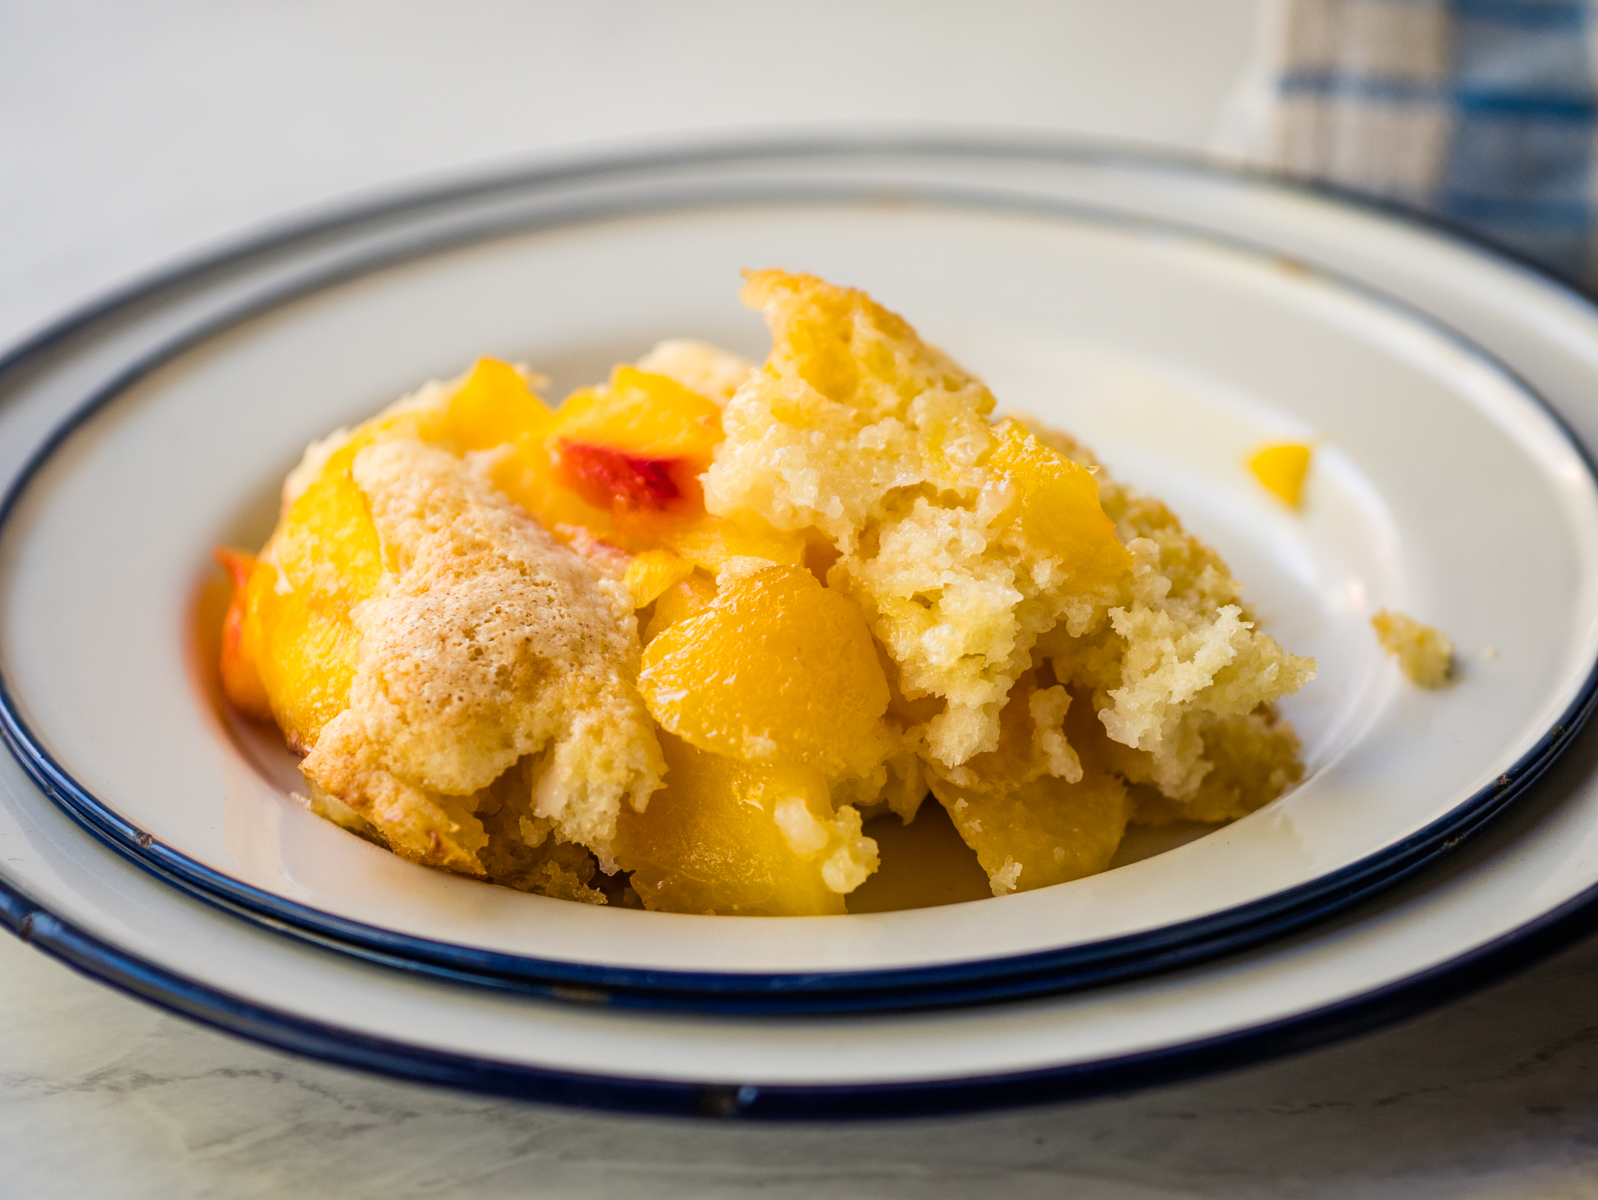 Plate with peach cobbler and a blue napkin.